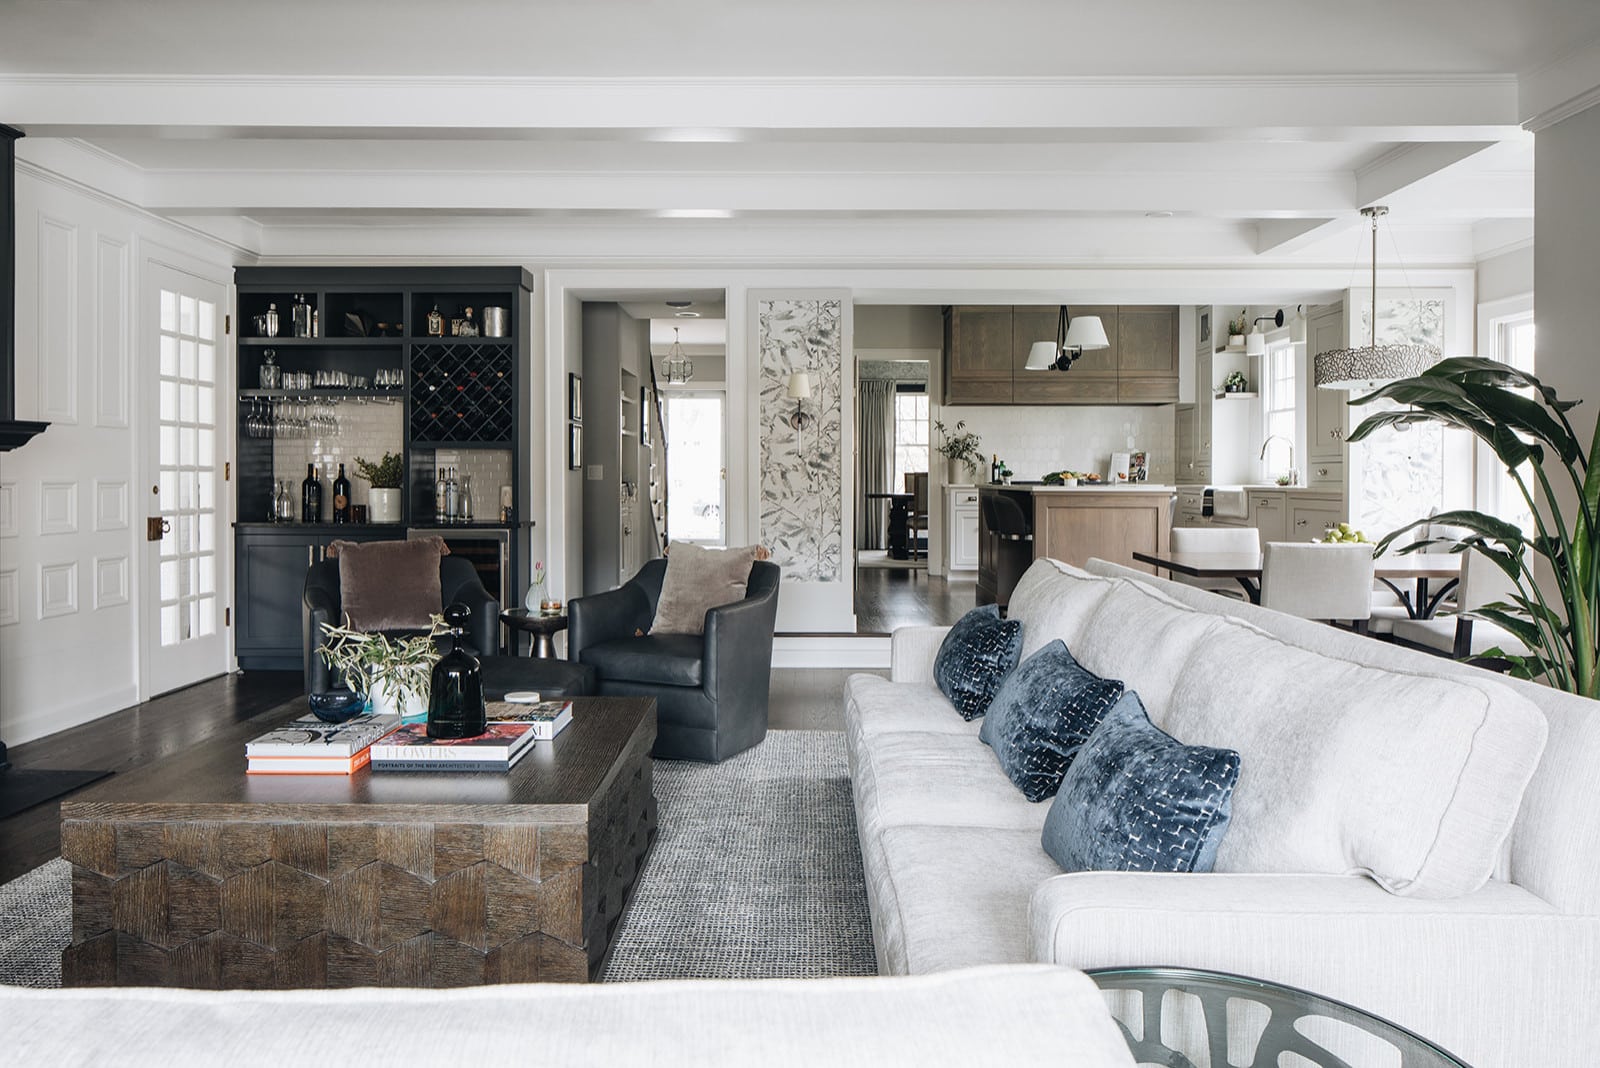 Home tour featuring family room with modern and traditional decor in dark blue, cream and charcoal